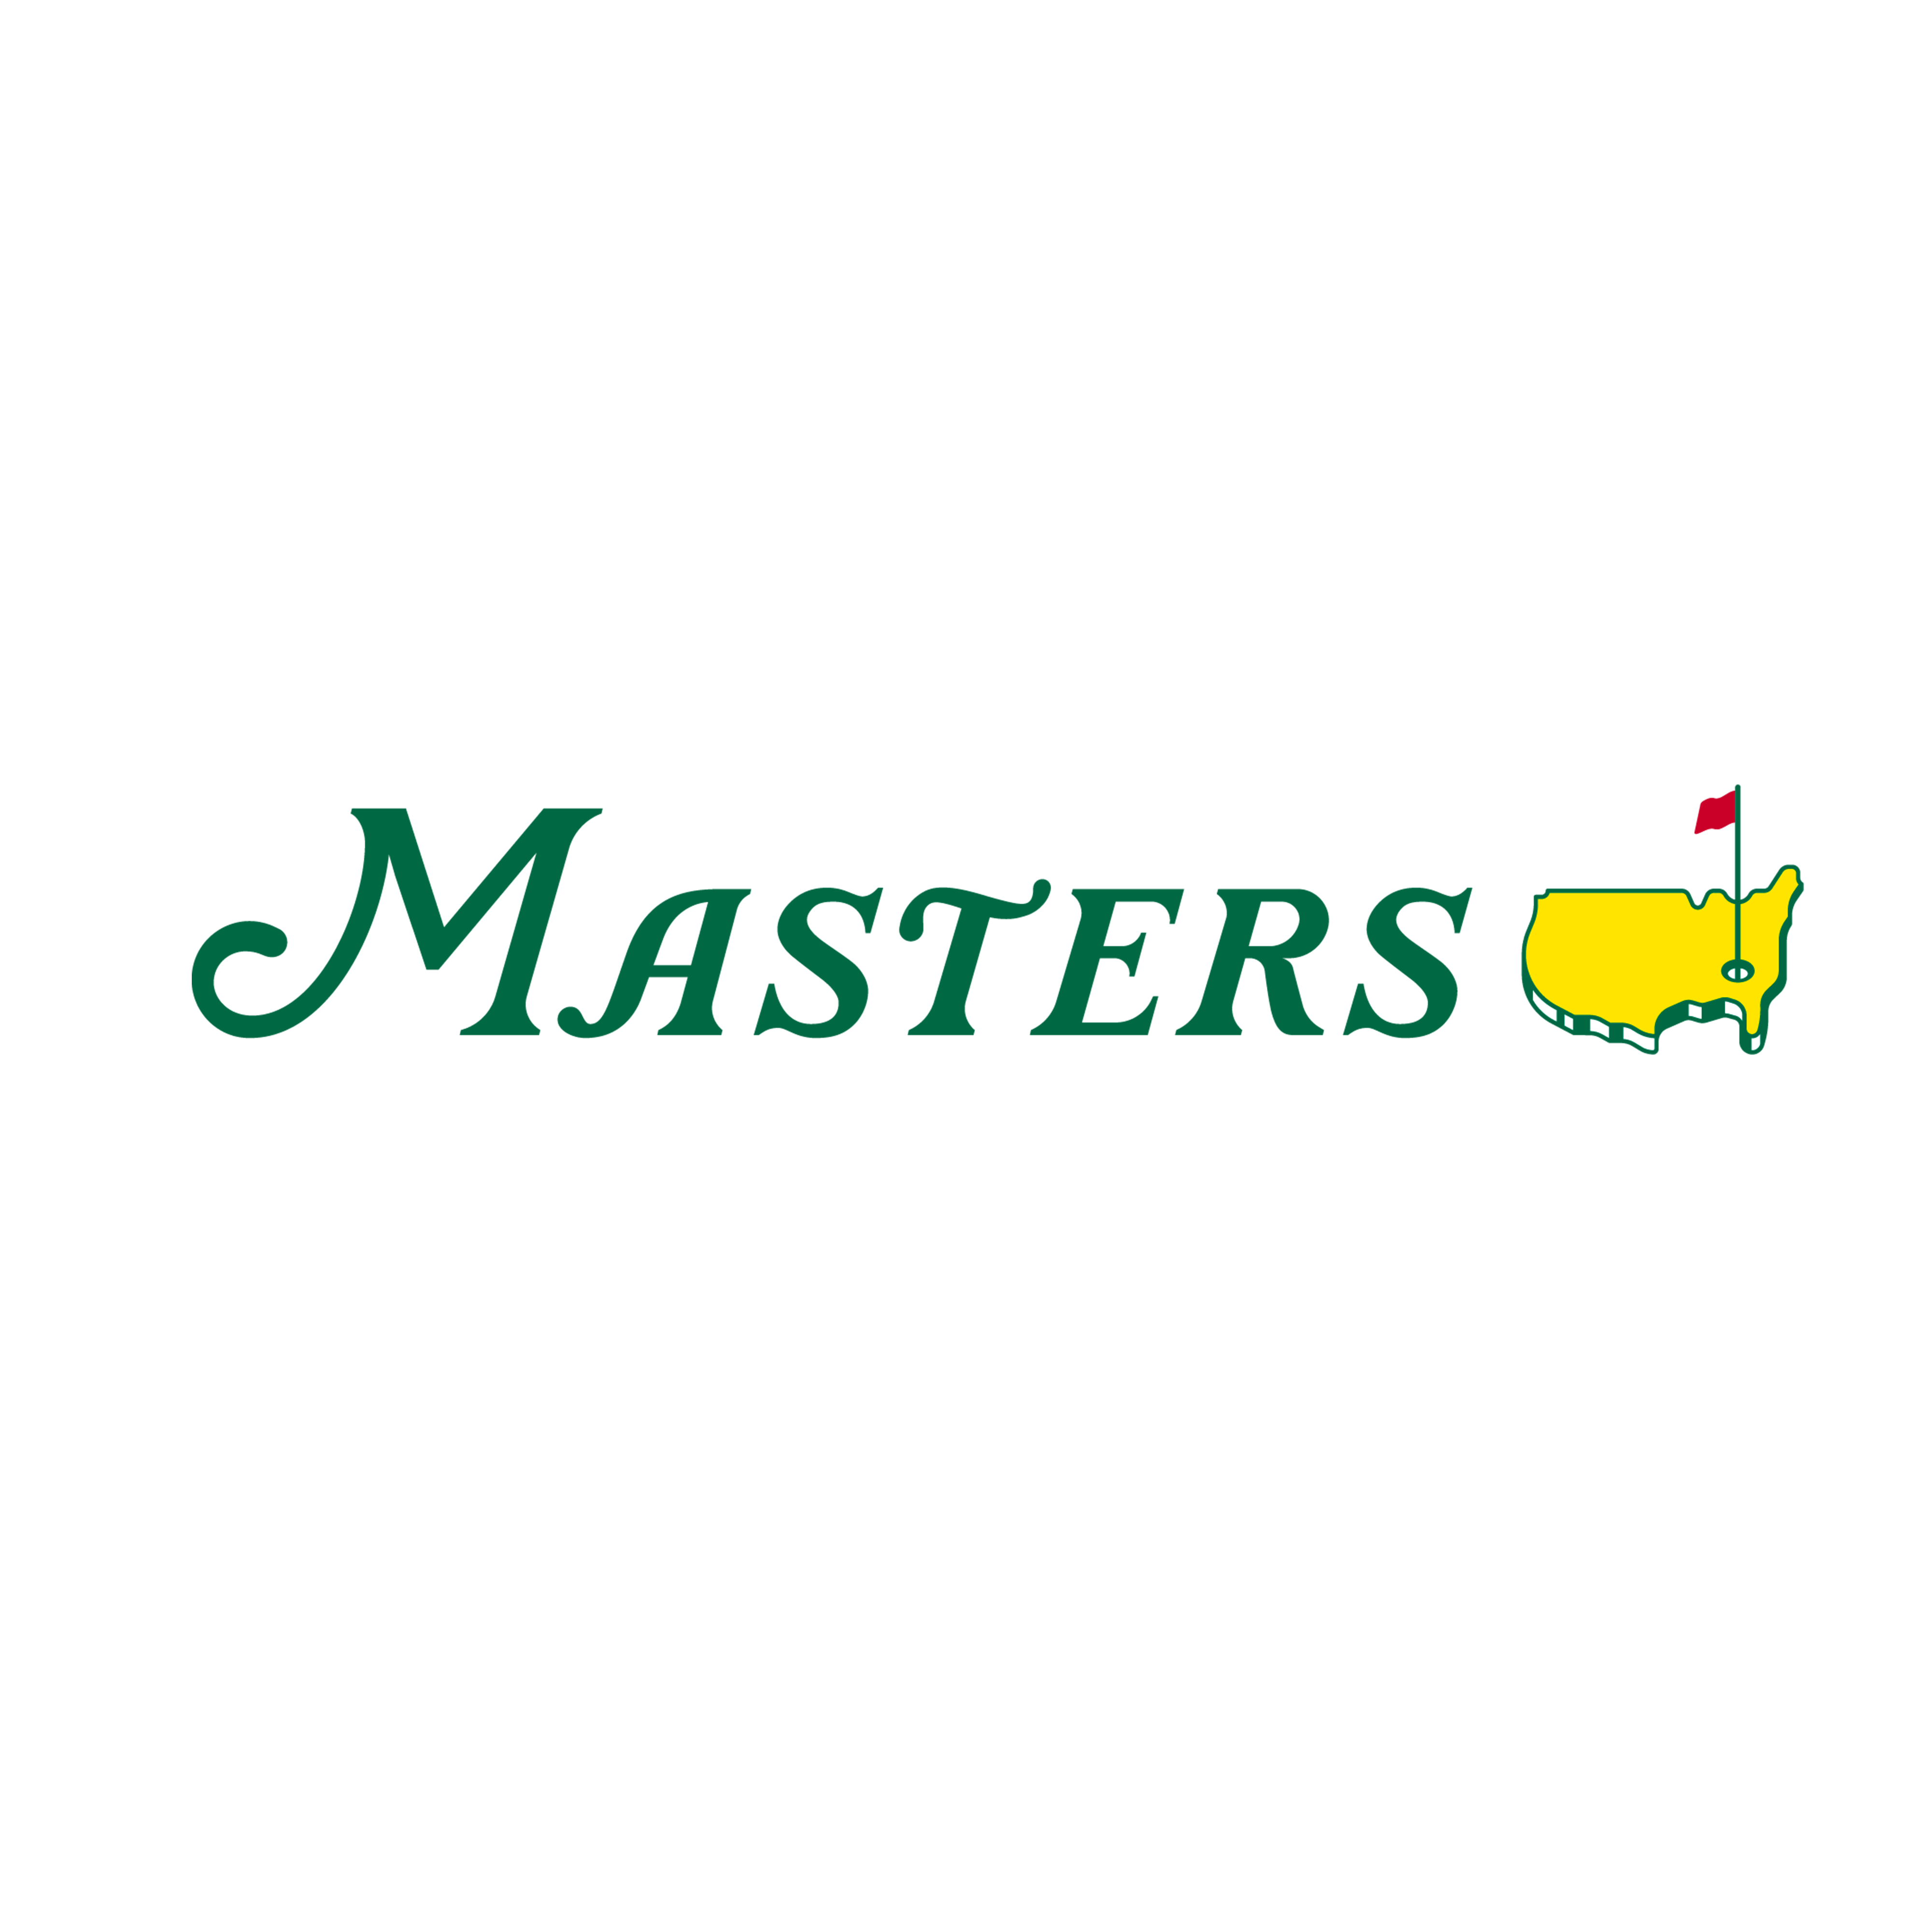 The Masters golftournament logo